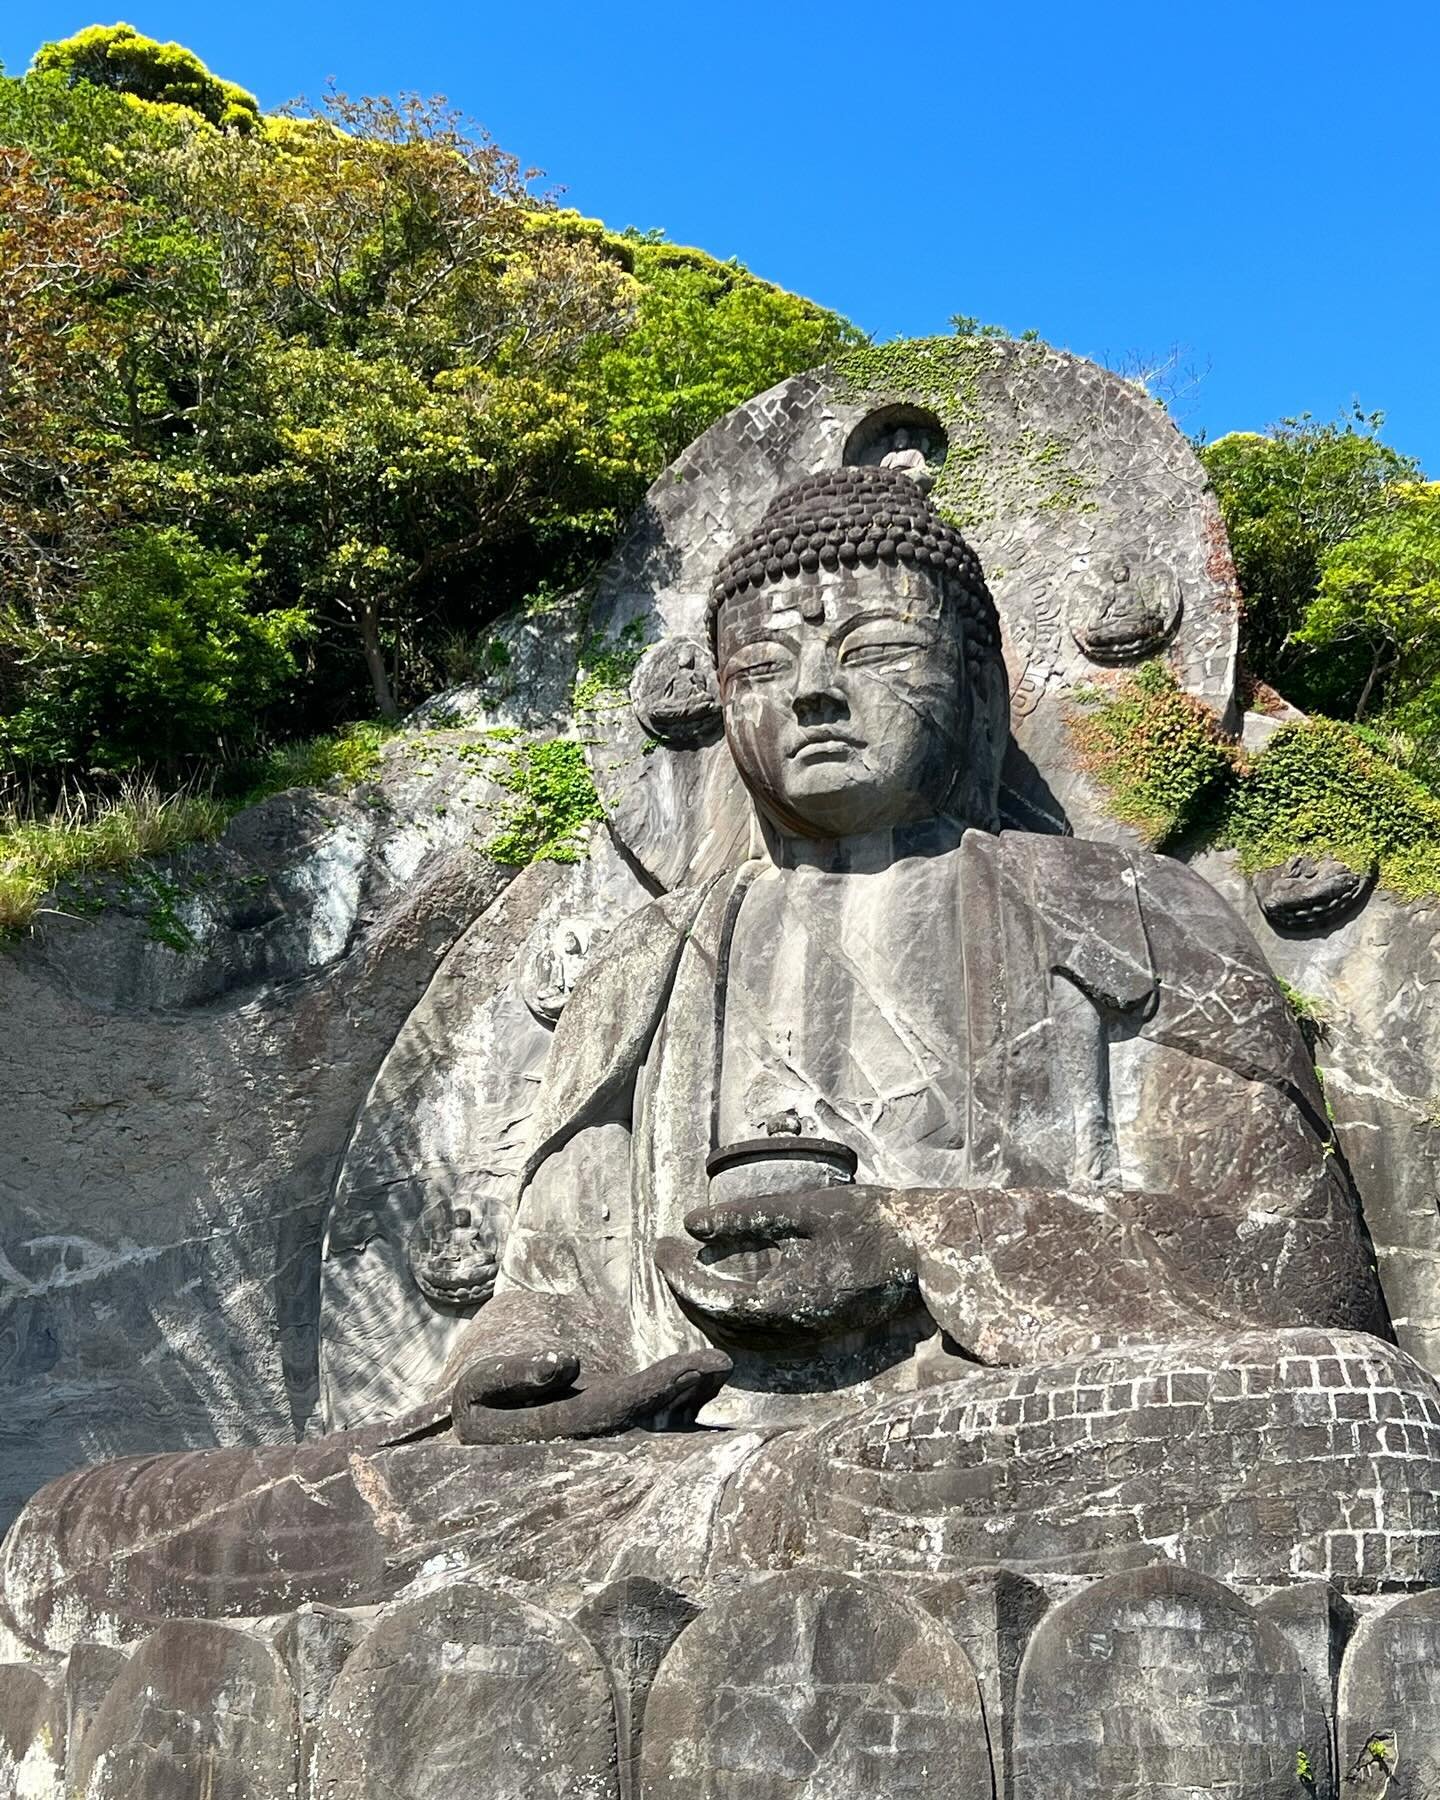 🥾Looking for an amazing hike near Tokyo? Head to Nokogiriyama (鋸山) or Mount Nokogiri, located in Chiba Prefecture.

🤩 It concentrates so many things to see and do: a ferry crossing of Tokyo Bay, a nature hike, beautiful views, a dose of culture and